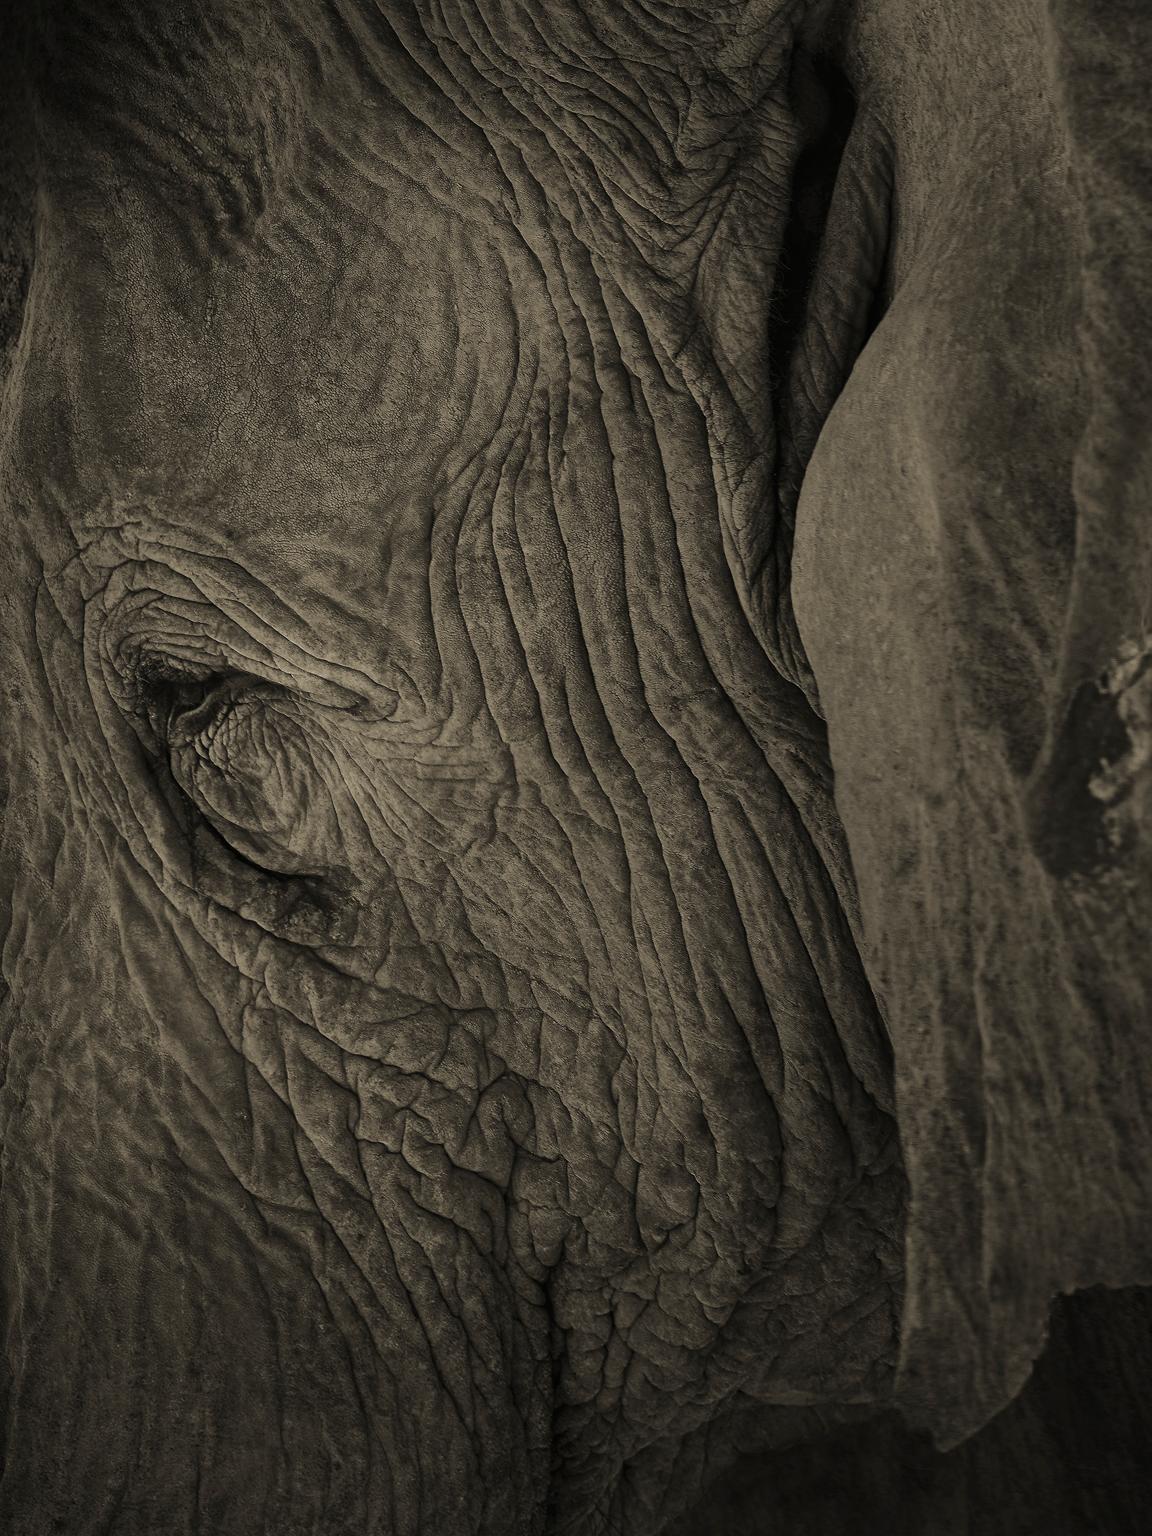 Elephant-03, Namibia, 2016. Archival Pigment Print. Edition of 7.
Signed, Dated and Numbered by the Artist.

Chris Gordaneer is one of the most passionate photographers of our time. His photography is at the intersection of beauty and perfection.